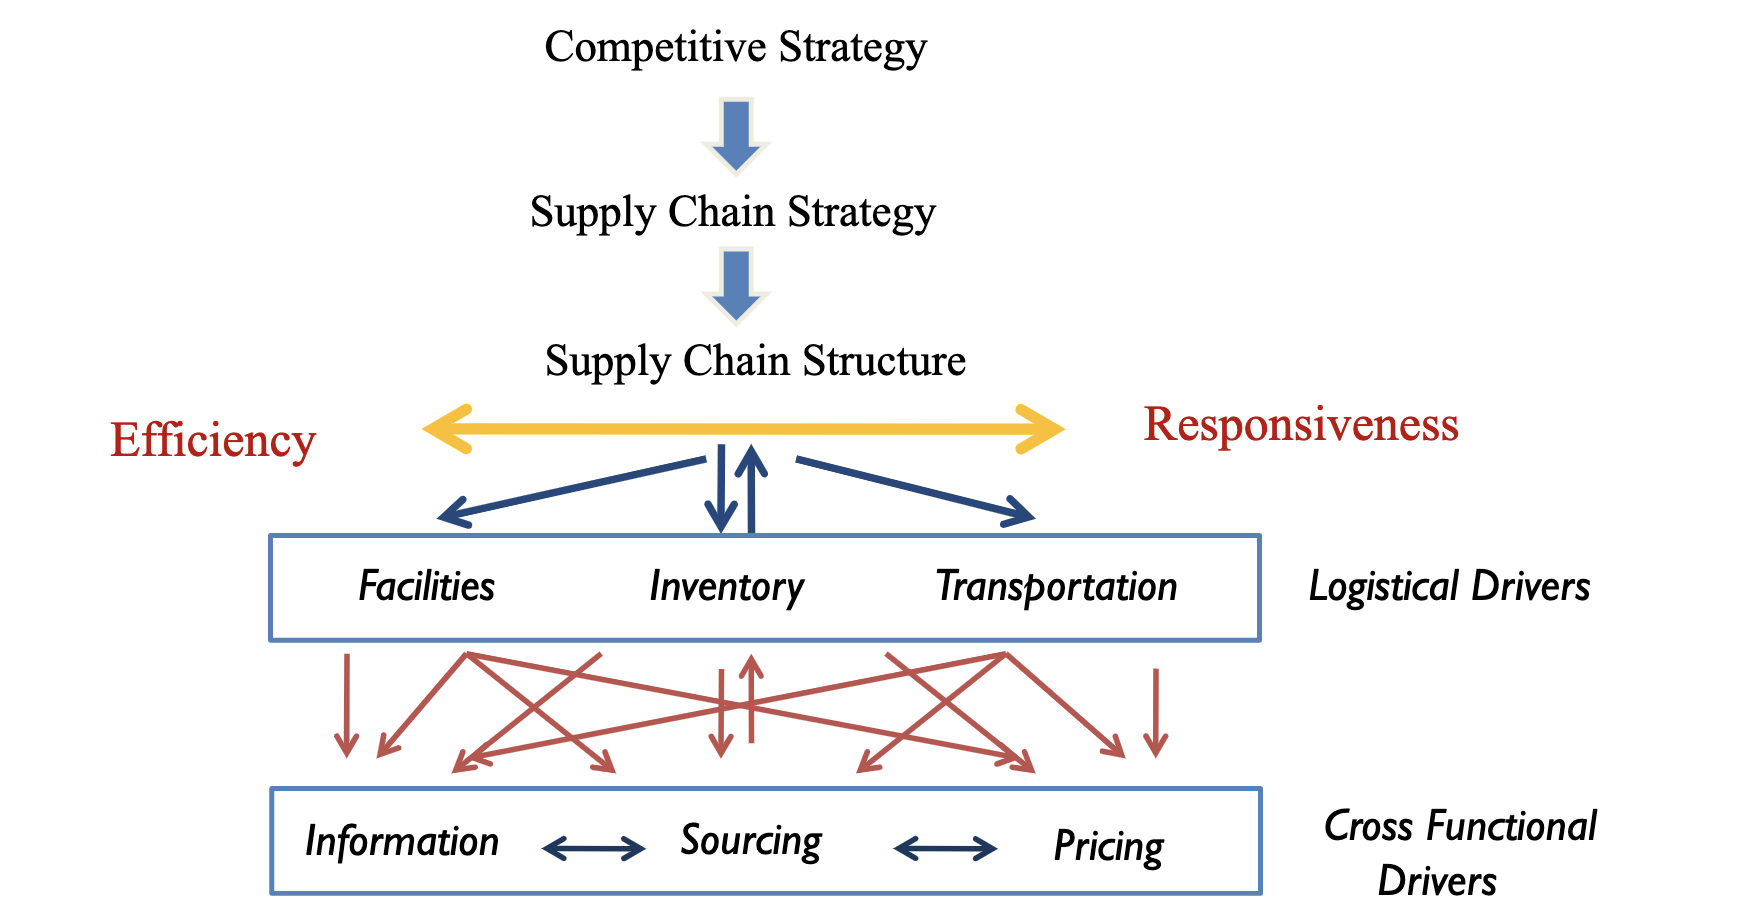 article review on supply chain management